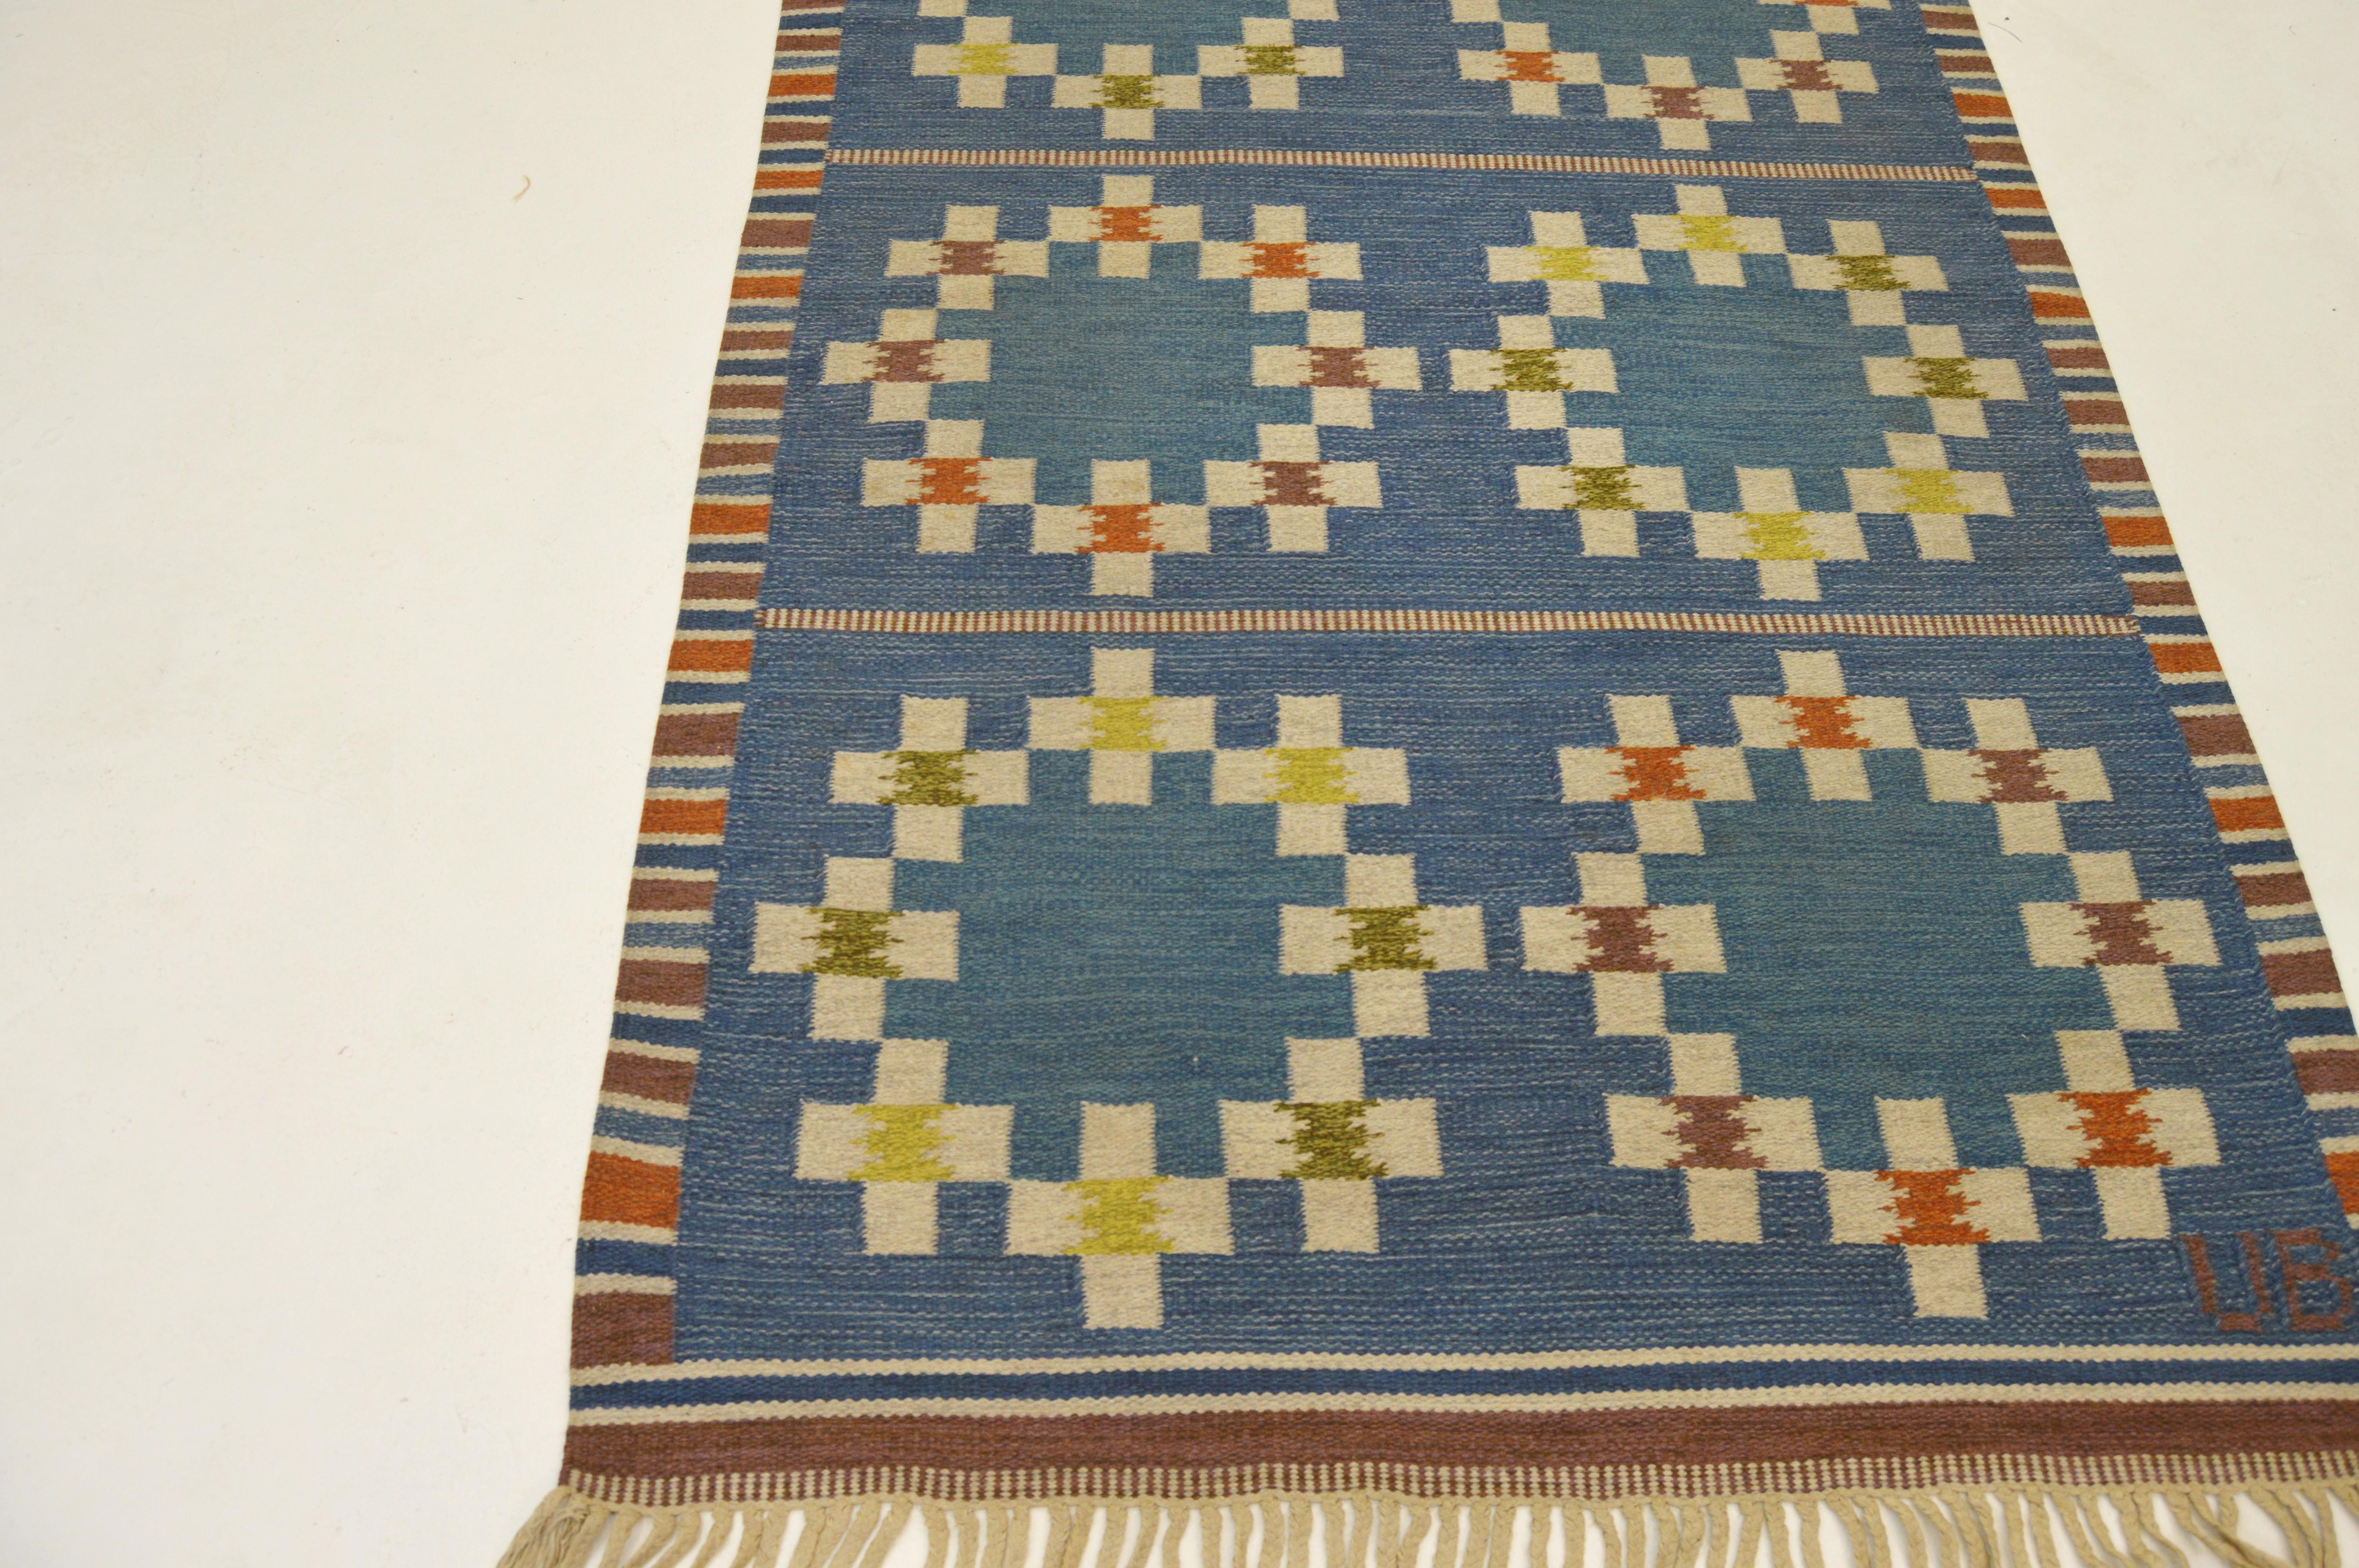 Nice vintage flat-weave rug.
Most likely produced in Sweden by the Finnish artist Uhra-Beata Simberg-Ehrstrom during the 1950s.